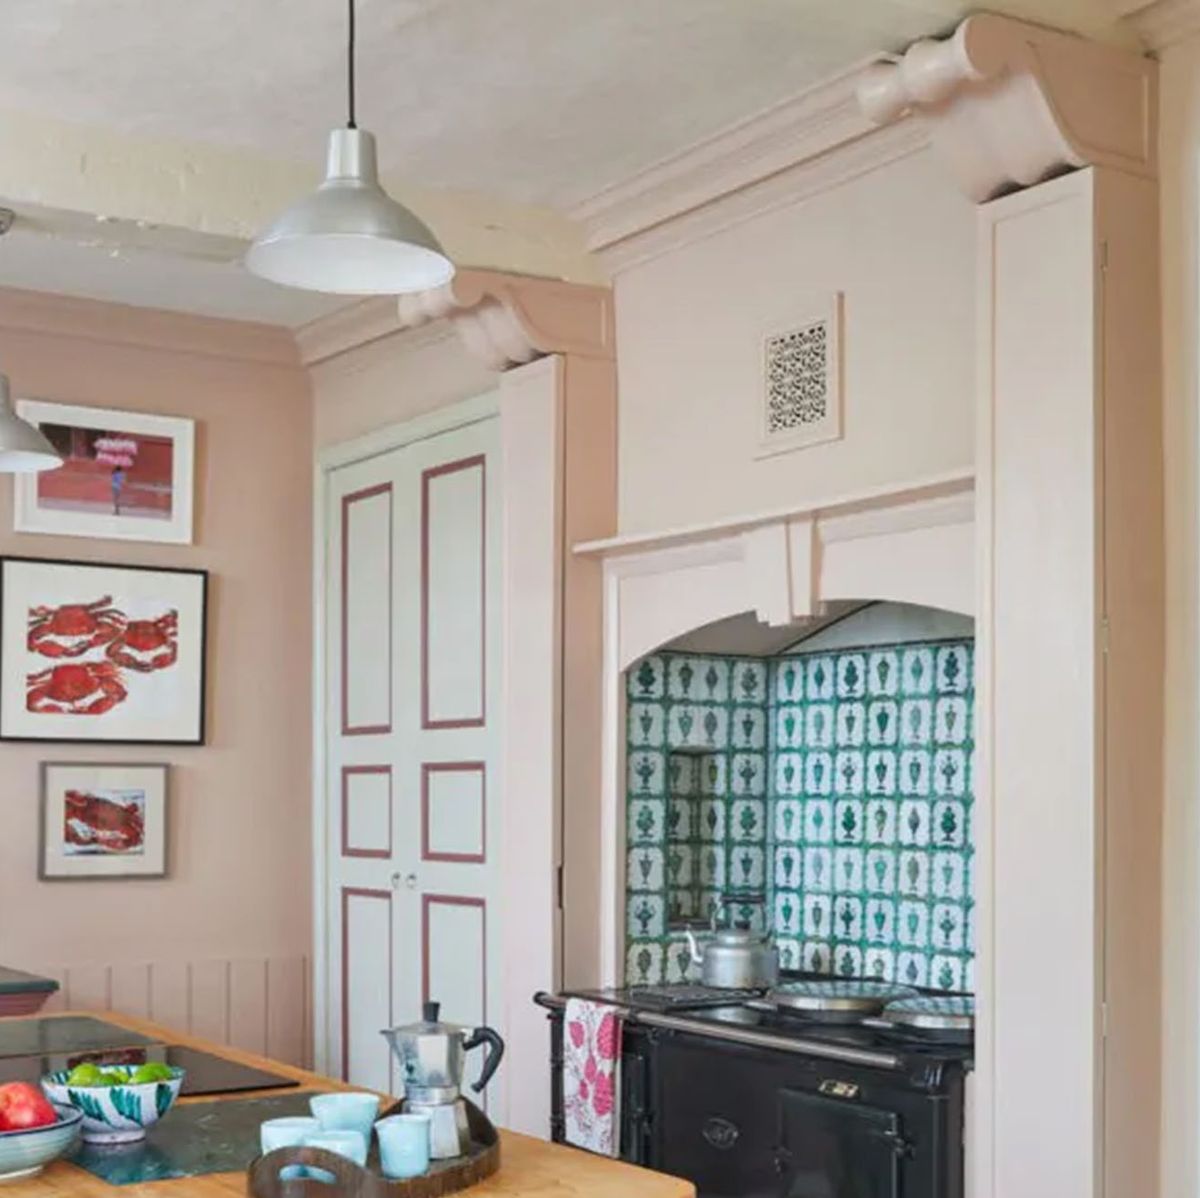 English Country Kitchens Are Trending—Here's How to Recreate the Look